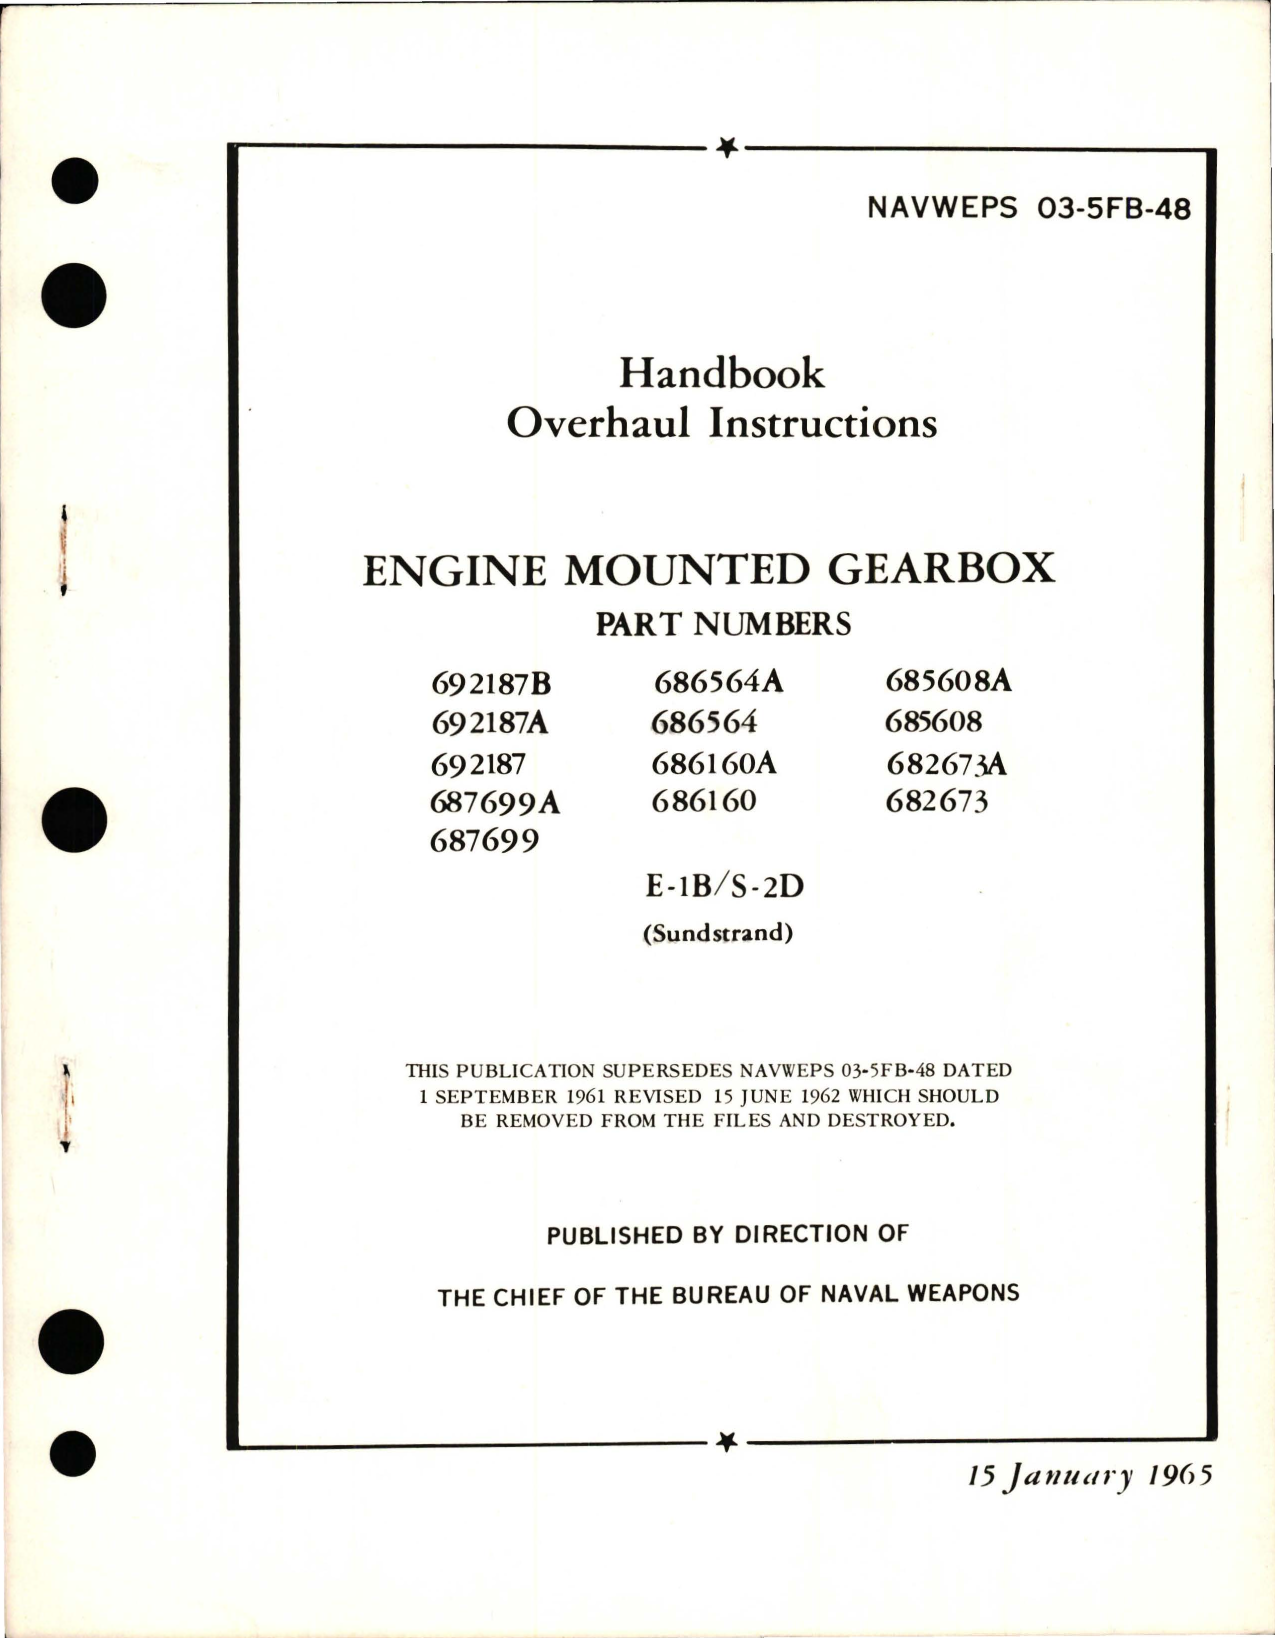 Sample page 1 from AirCorps Library document: Overhaul Instructions for Engine Mounted Gearbox - E-1B and S-2D